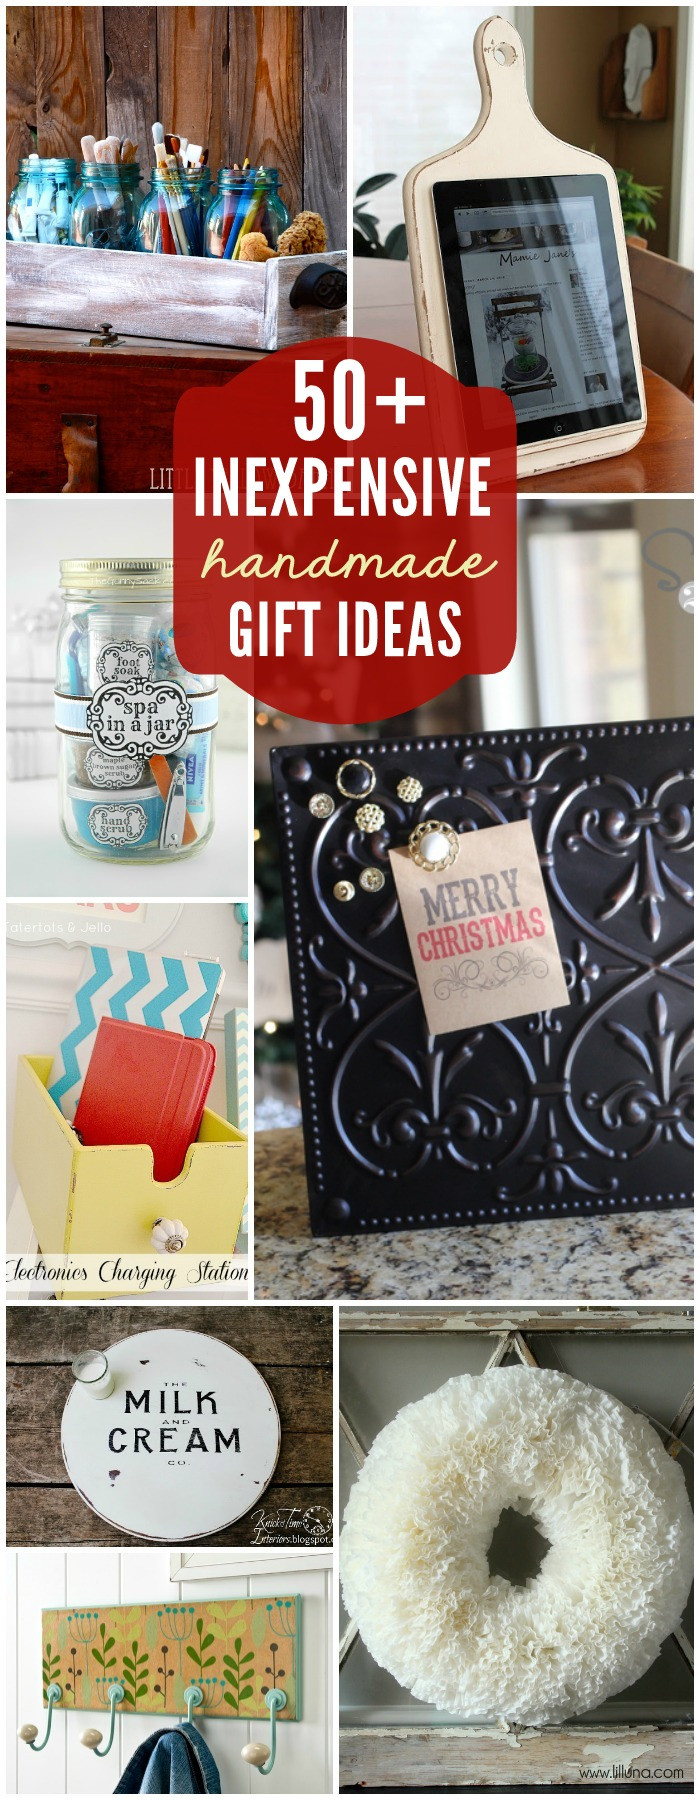 Inexpensive DIY Christmas Gifts
 75 Gift Ideas under $5